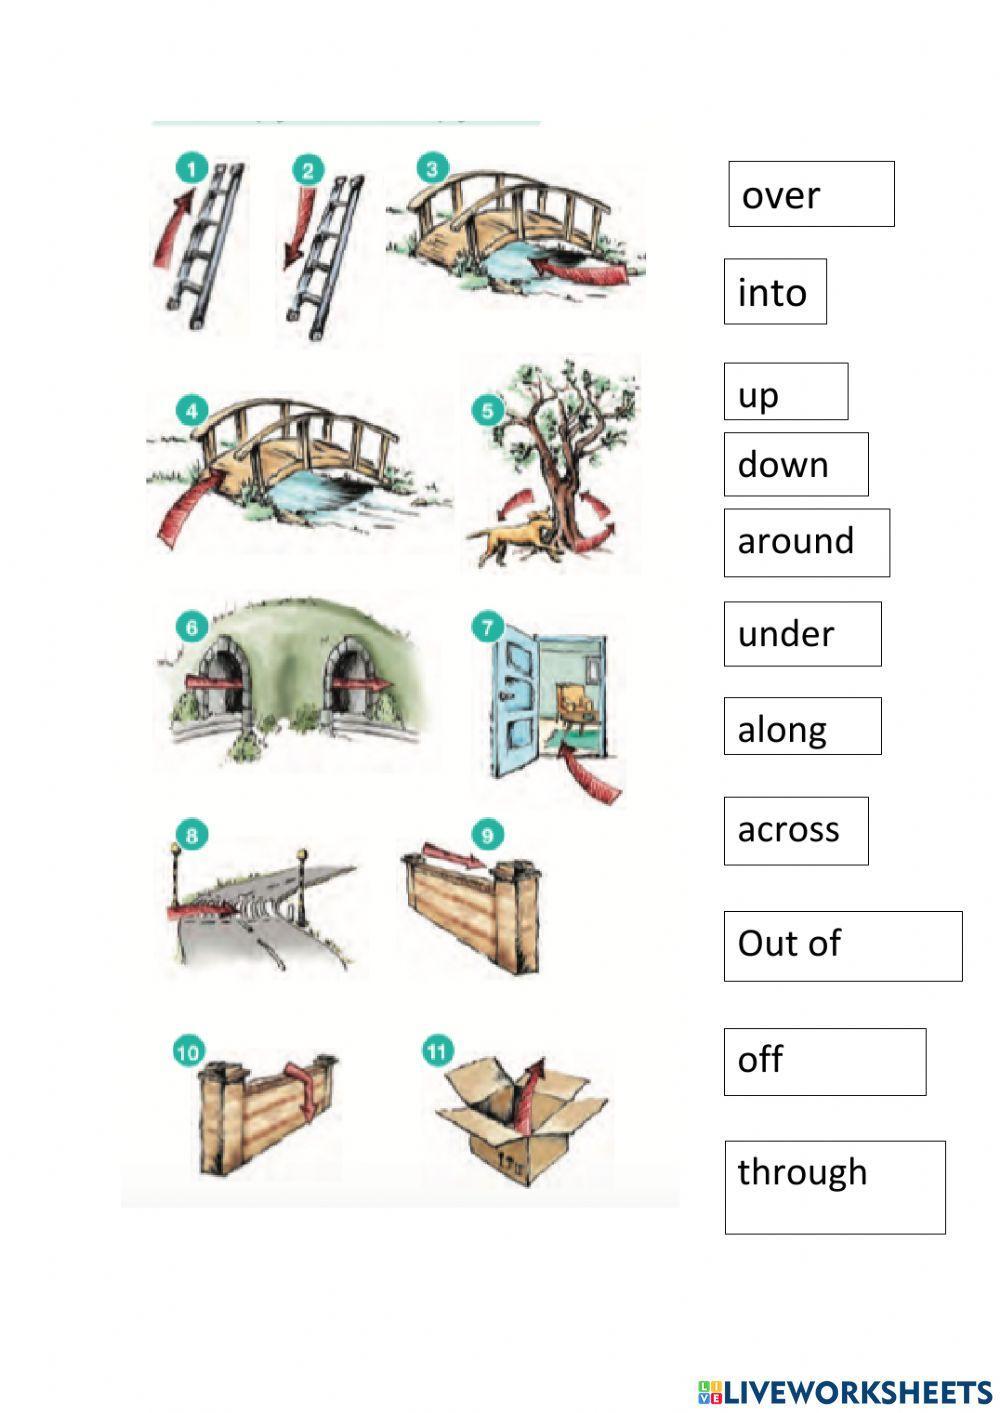 Prepositions of movements